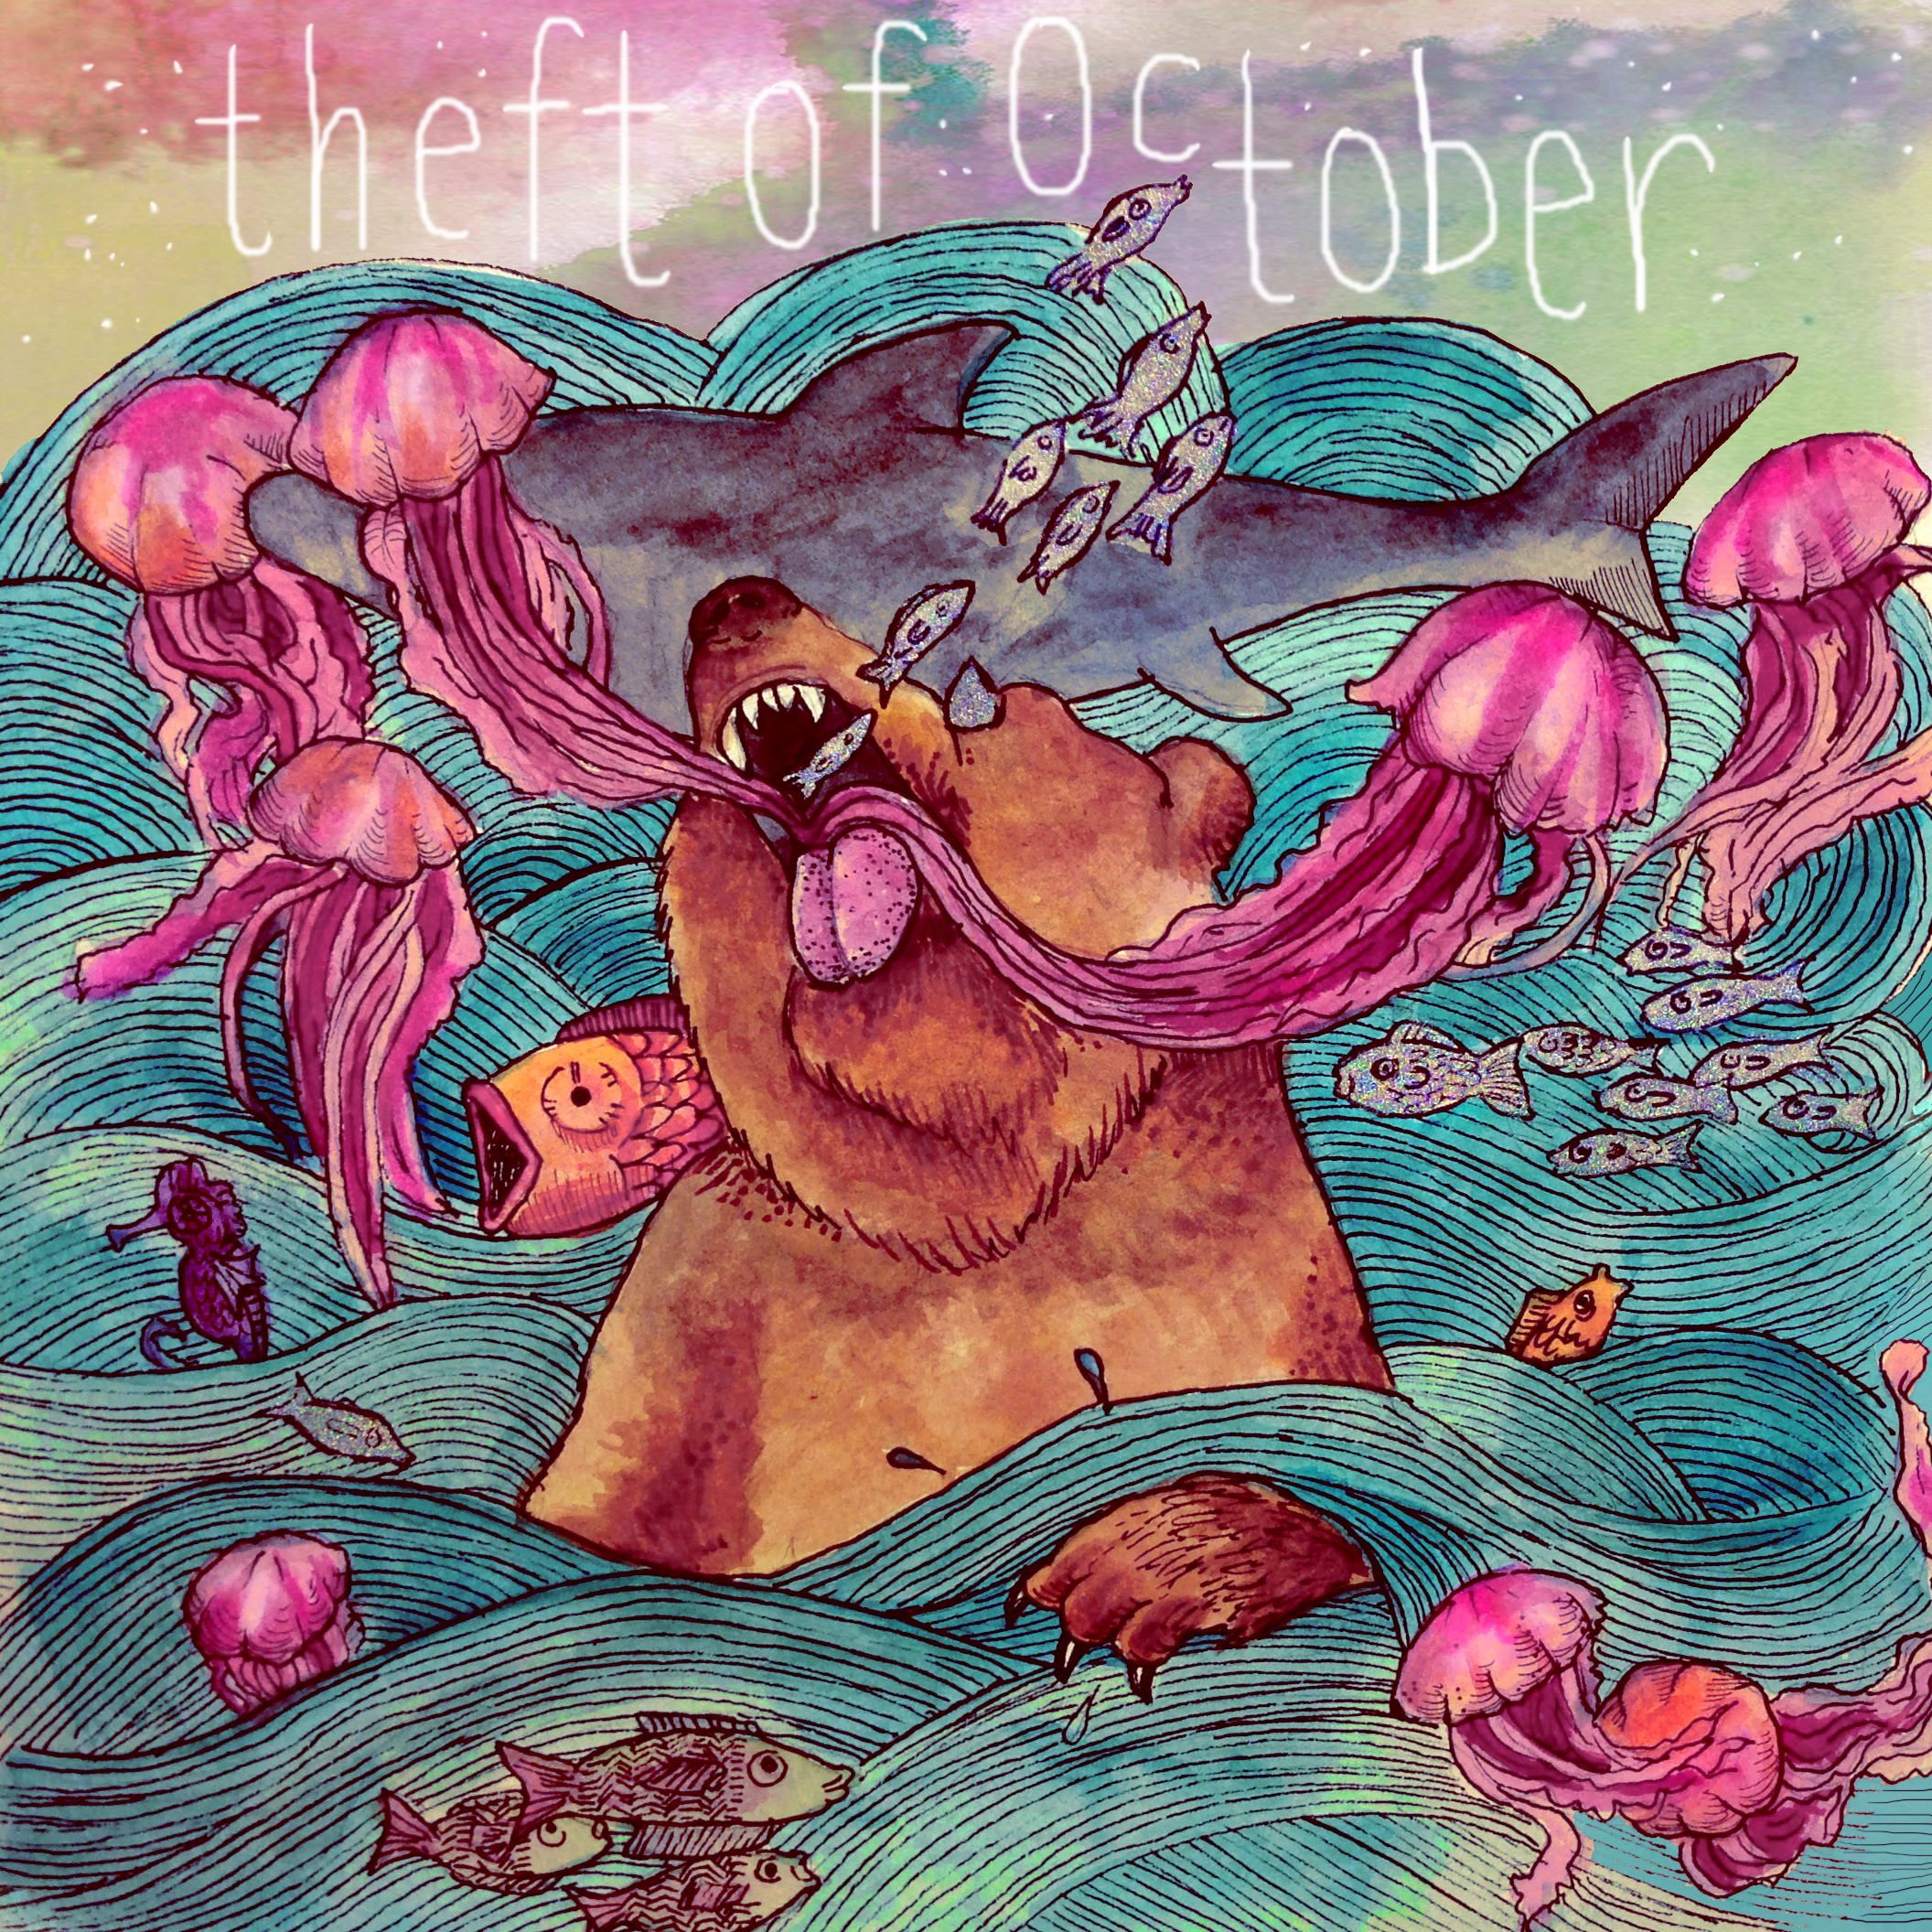 cover art for “Theft Of October”